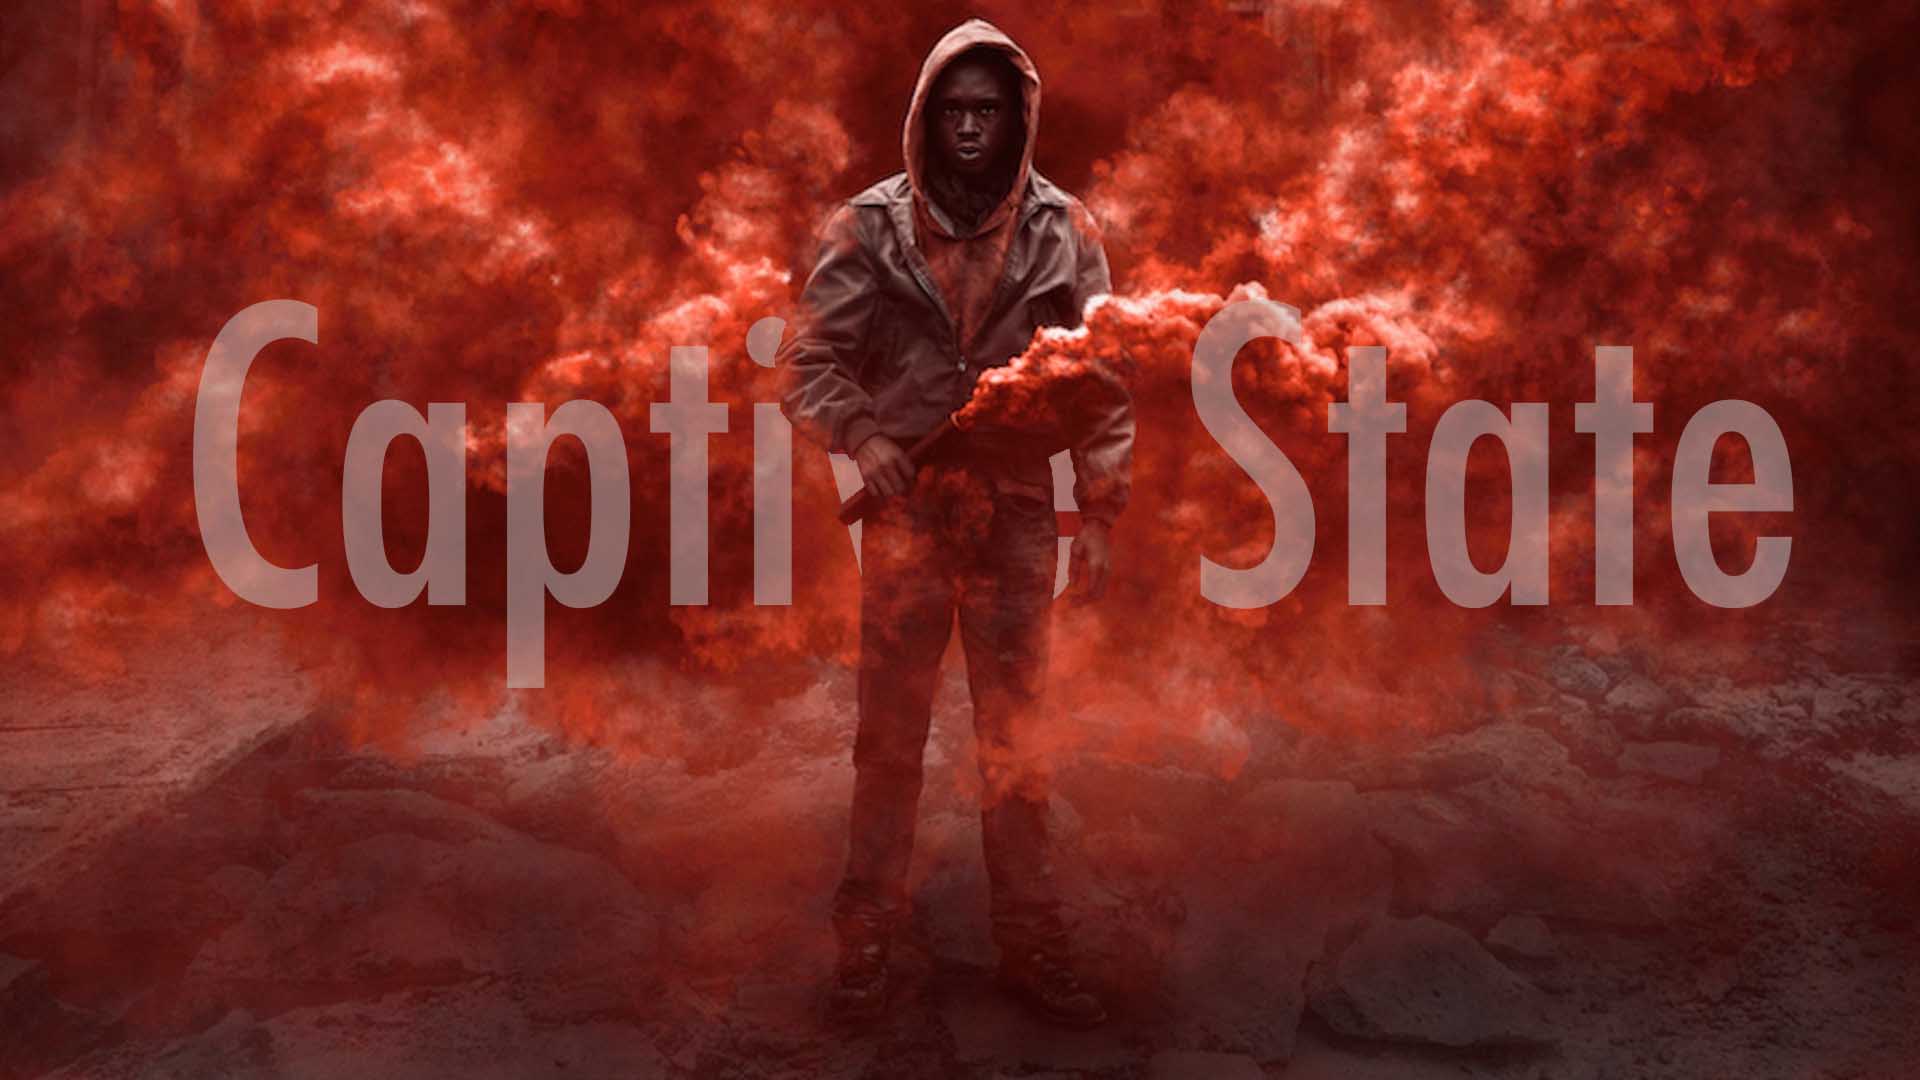 Captive State 2019 Movie Wallpapers